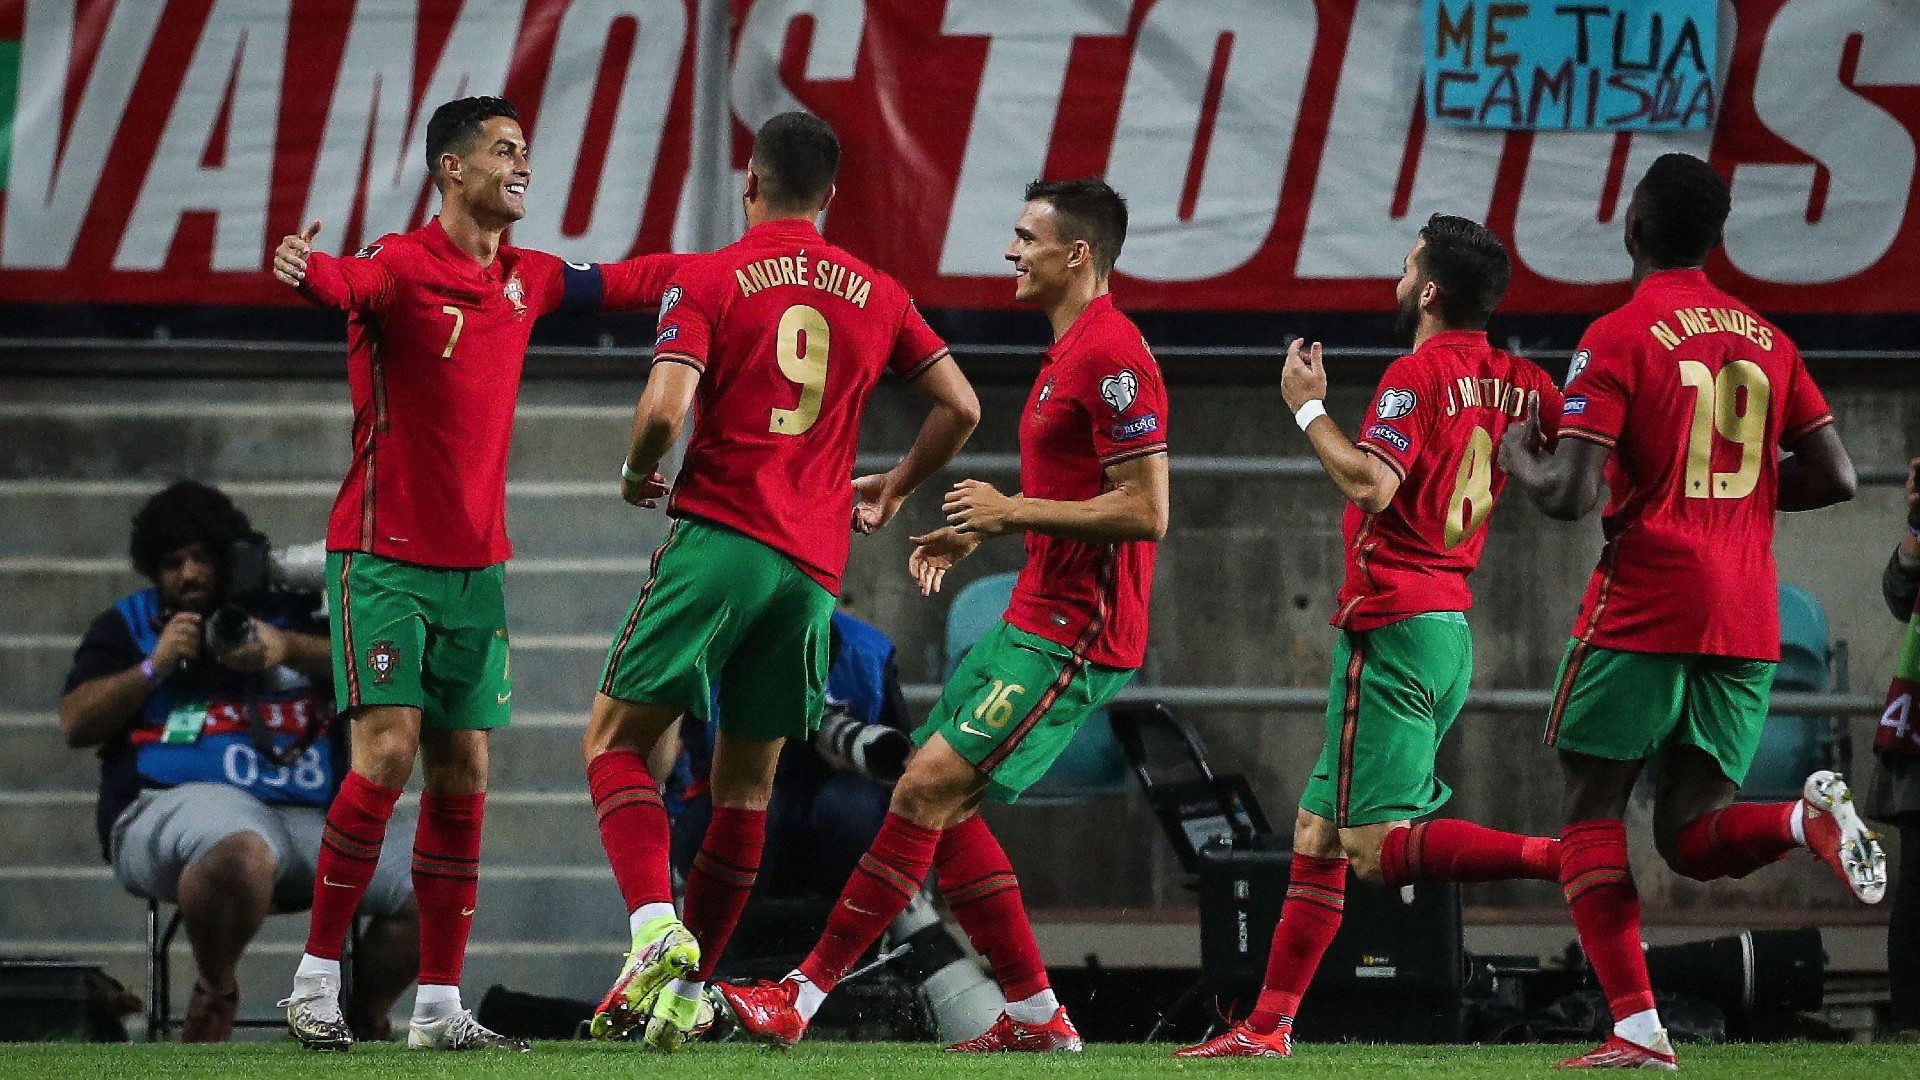 Ronald hat-trick inspires five-goal Portugal rout